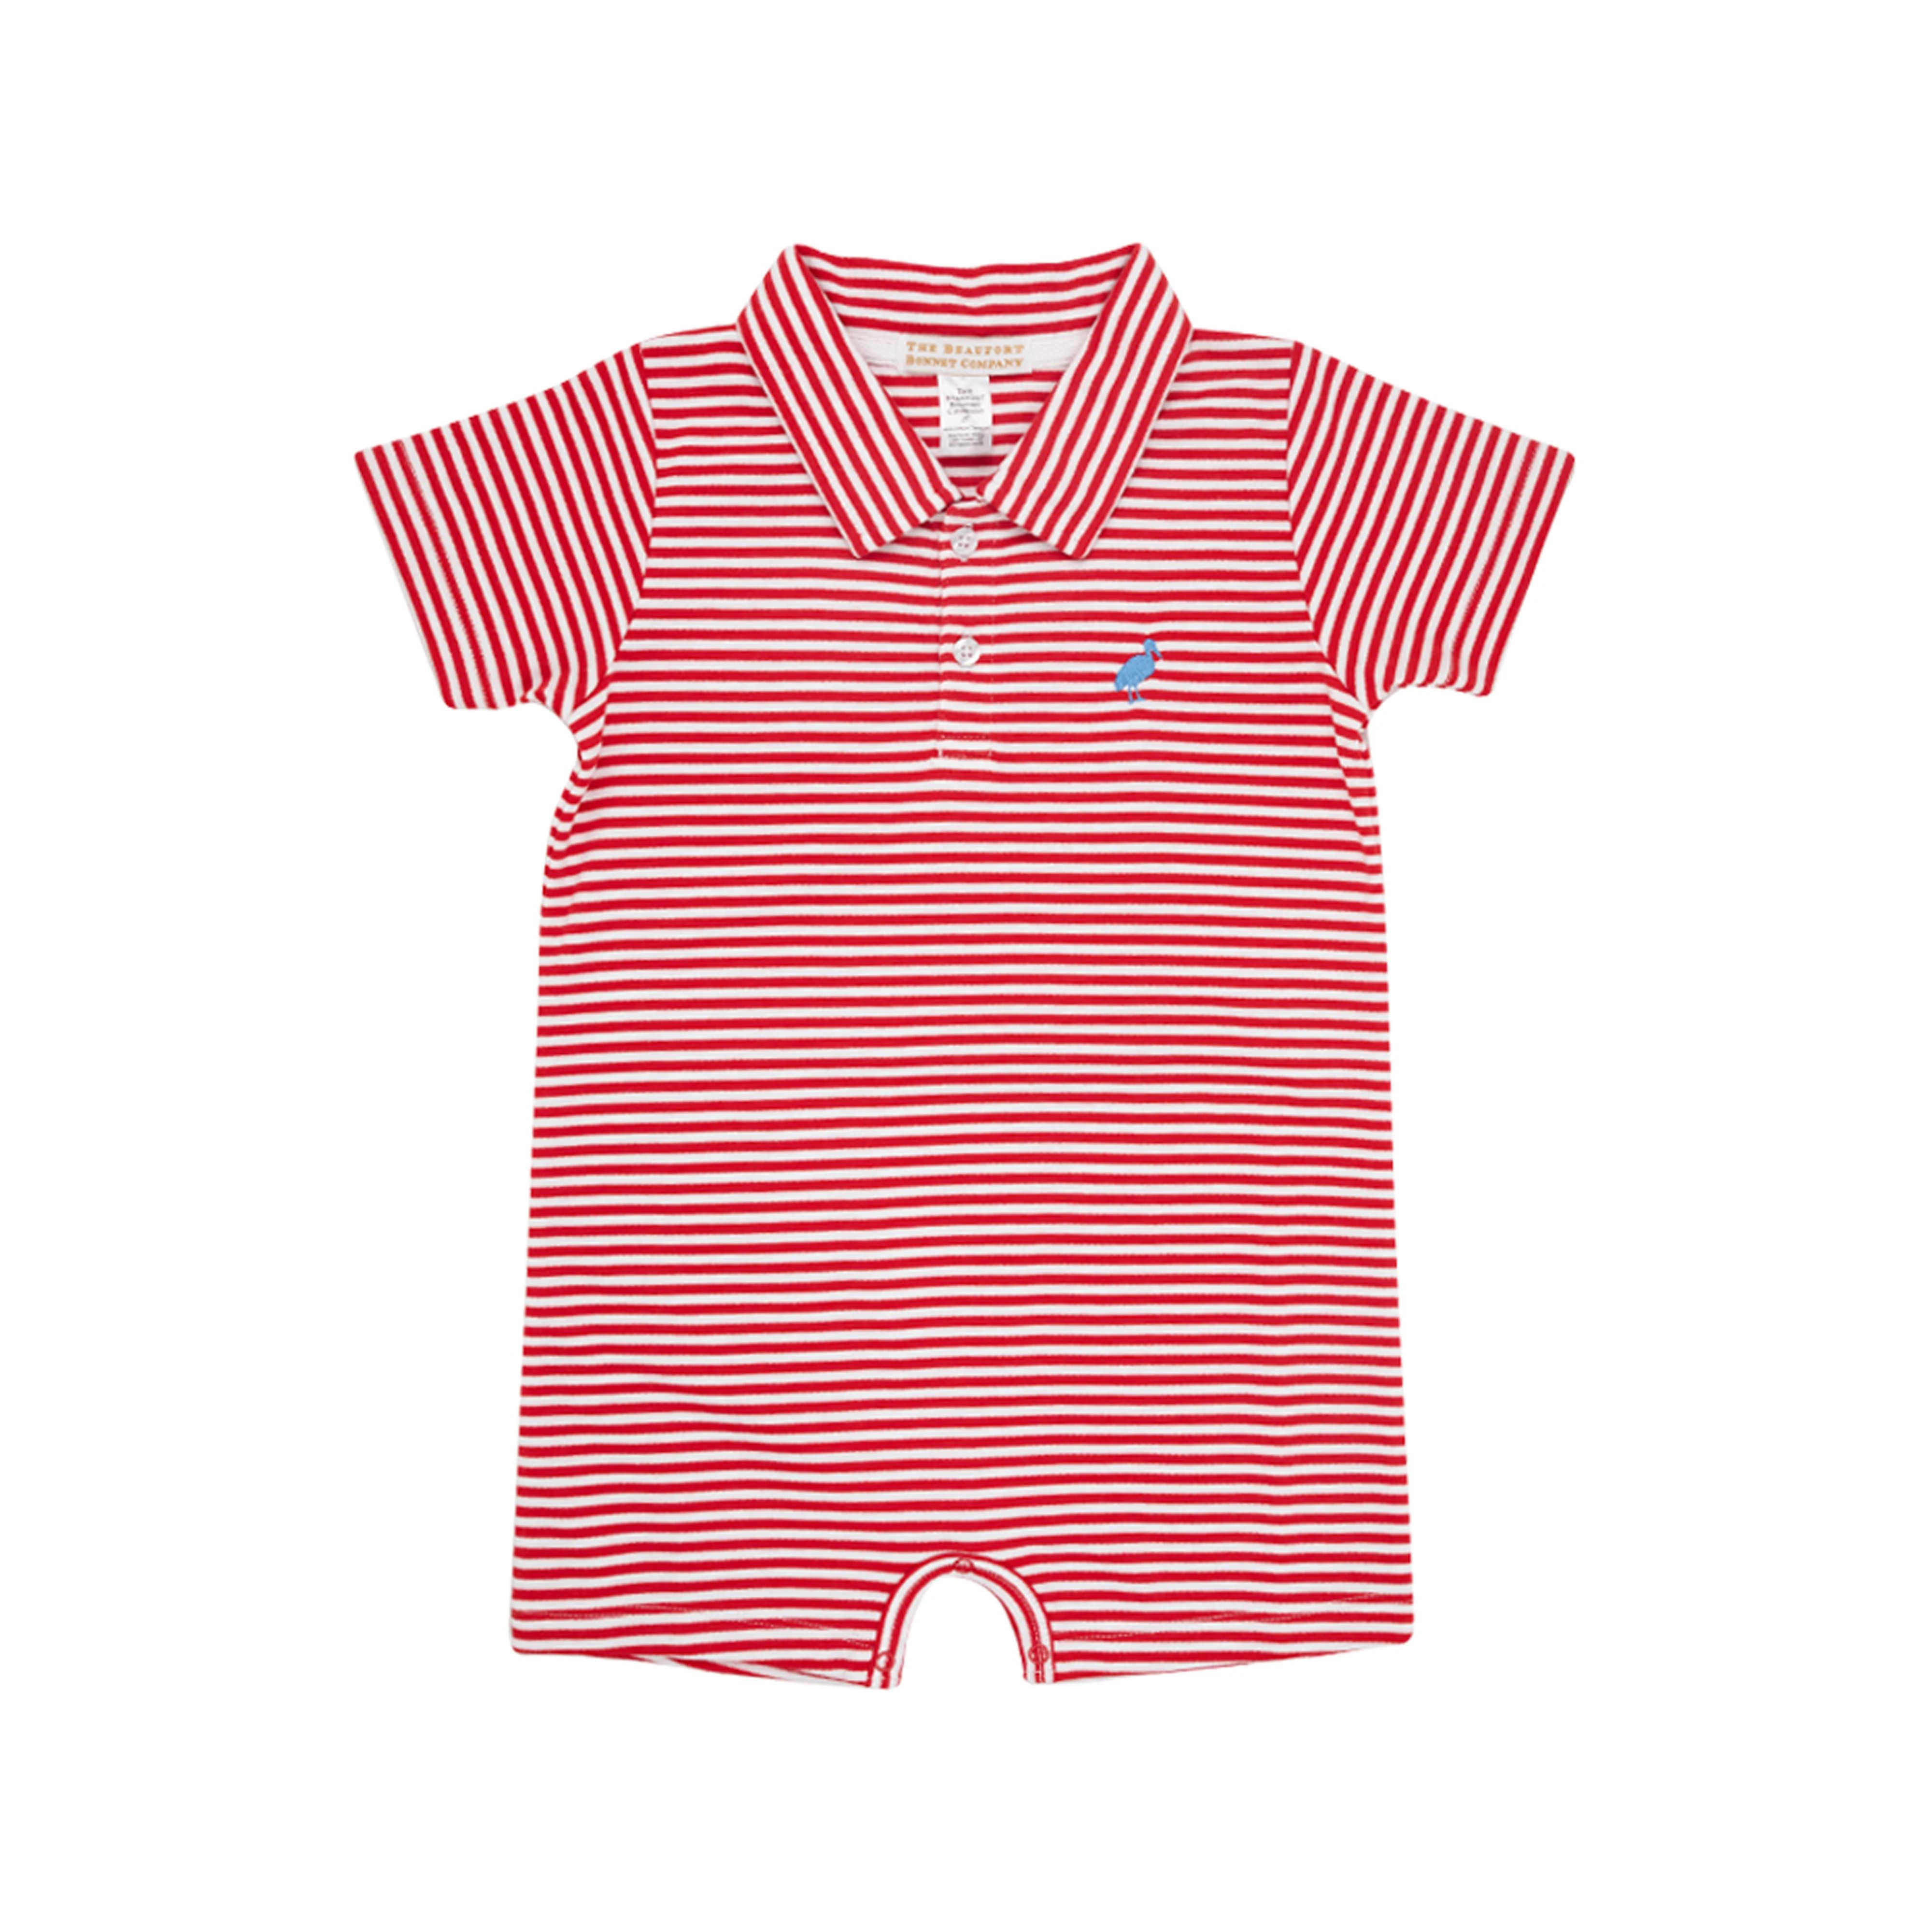 Sir Proper's Romper - Richmond Red Stripe with Barbados Blue Stork | The Beaufort Bonnet Company